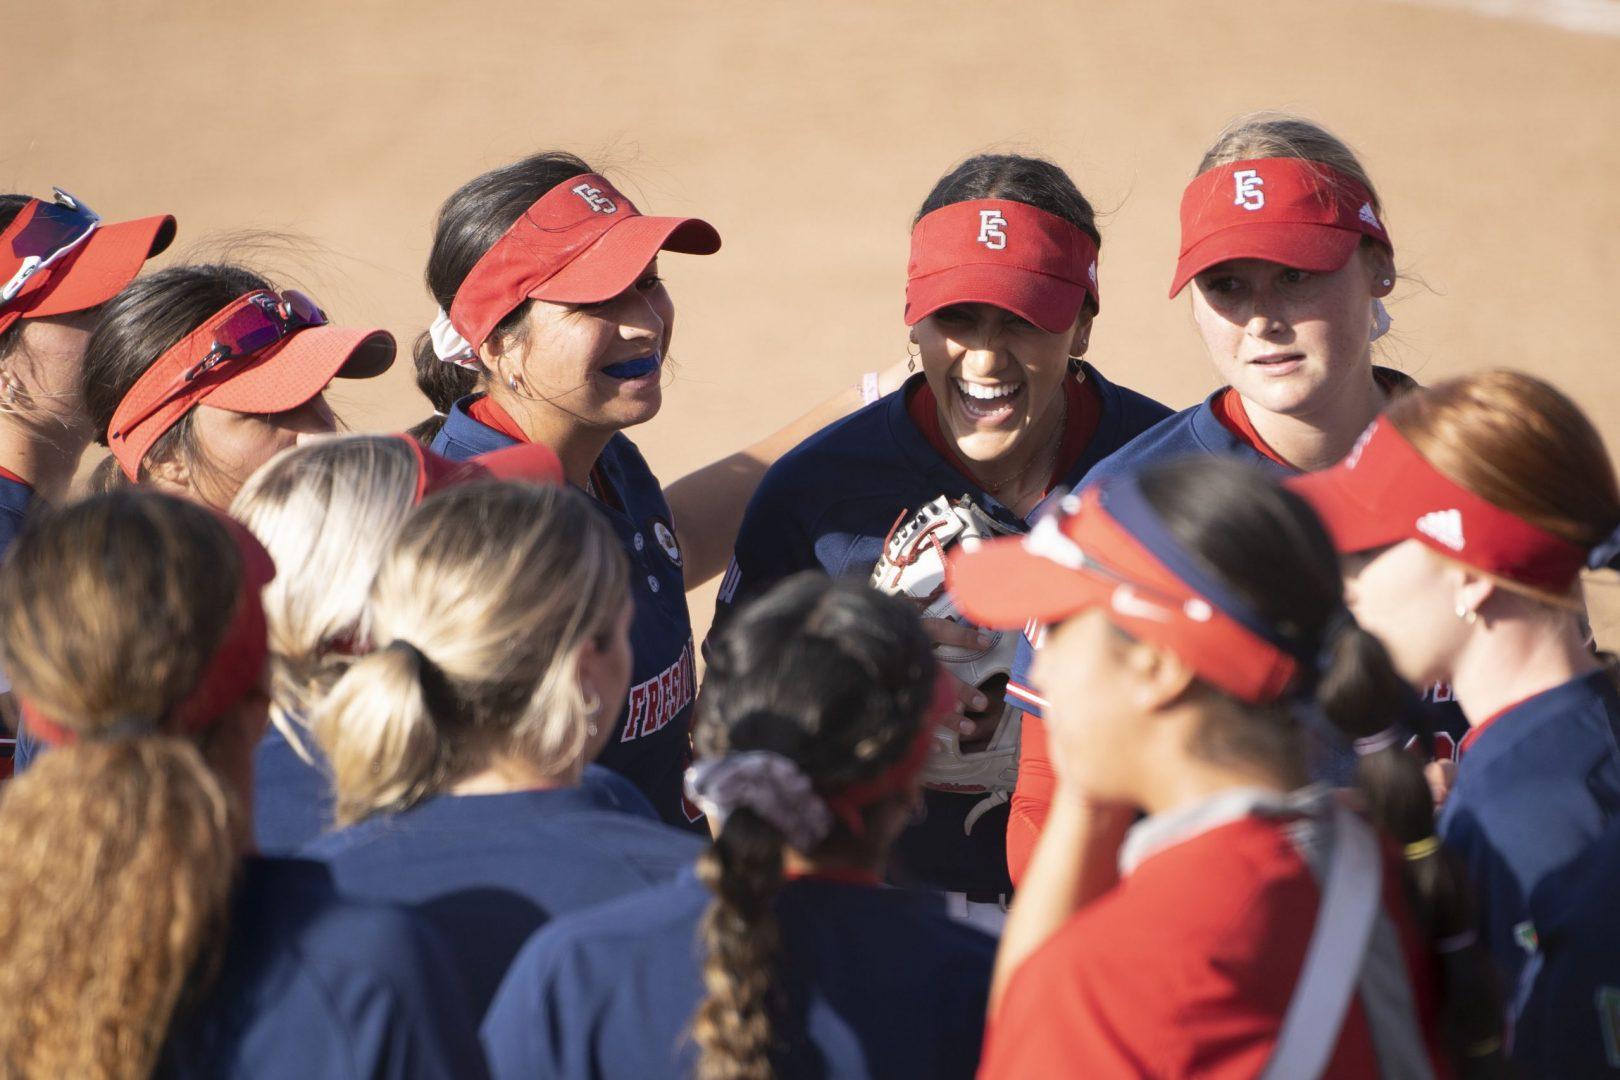 The Fresno State Softball team celebrates its win over Saint Marys after the first game of the doubleheader on April 5, 2022 at Margie Wright Diamond. (Wyatt Bible/ The Collegian)